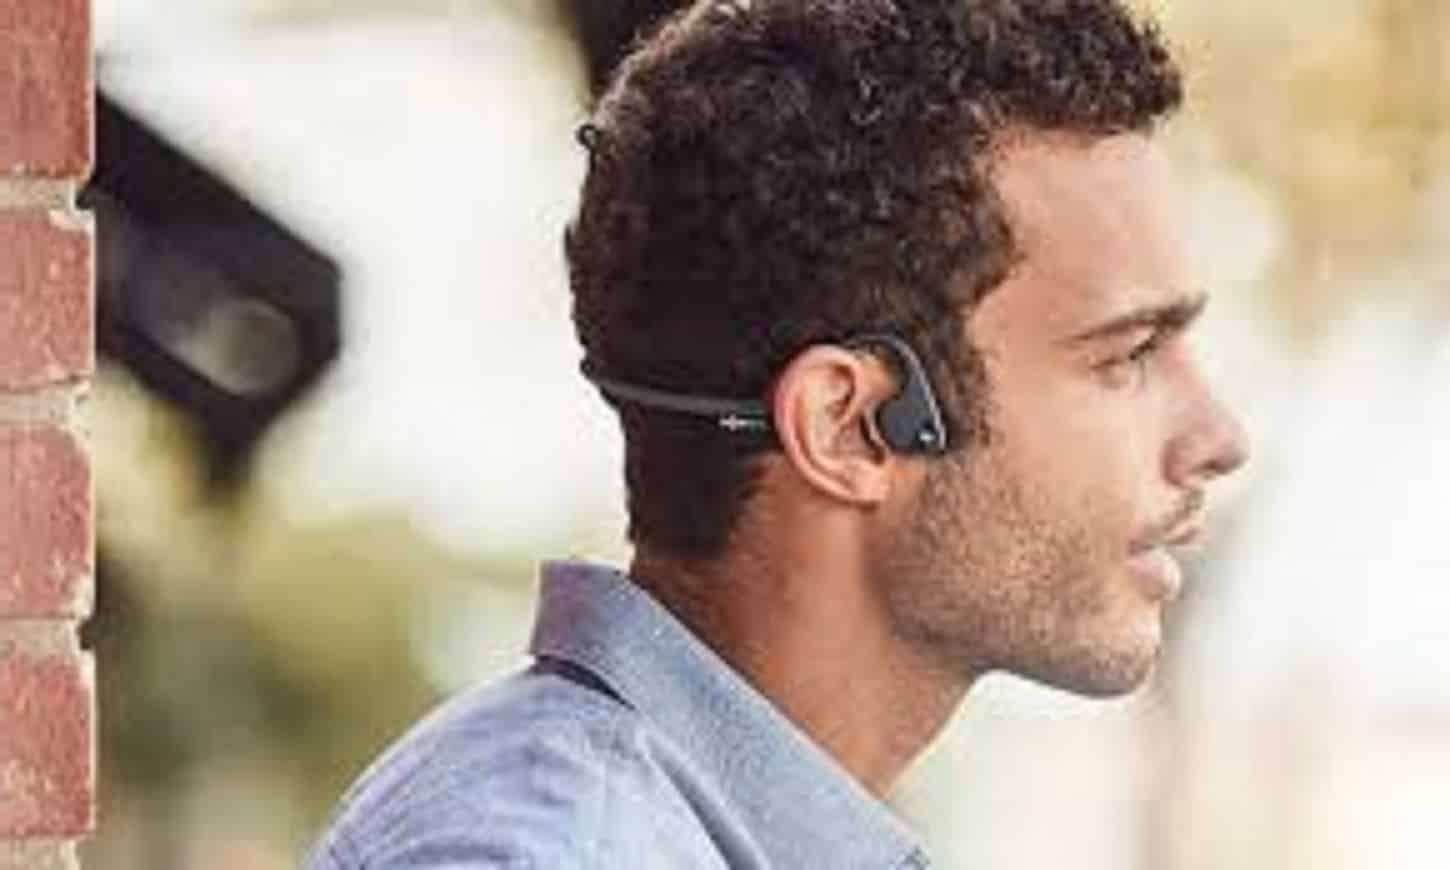 Bone Conduction Headphones – How to find?